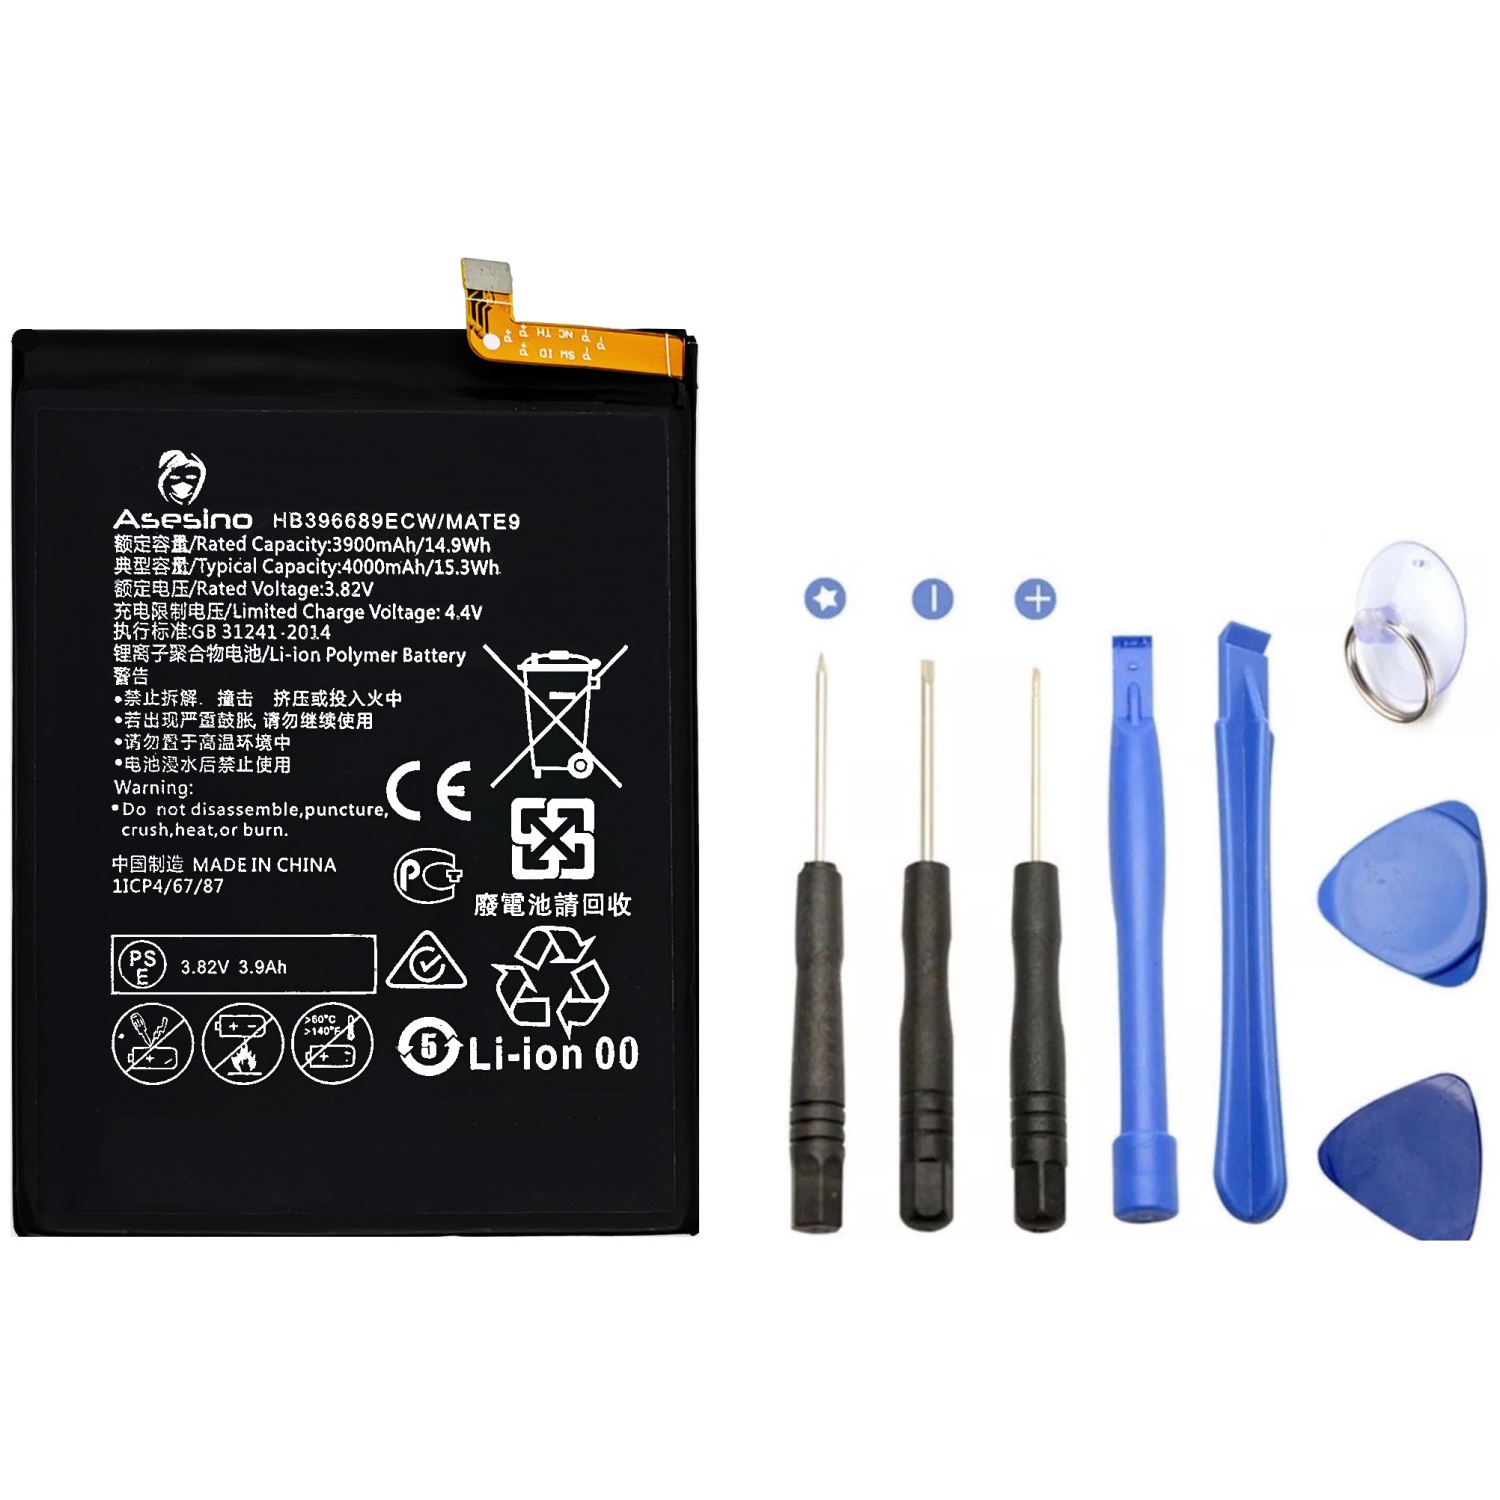 Asesino Replacement Huawei Mate 9/Mate 9 Pro Battery (HB396689ECW) with Toolkit 4000mAh